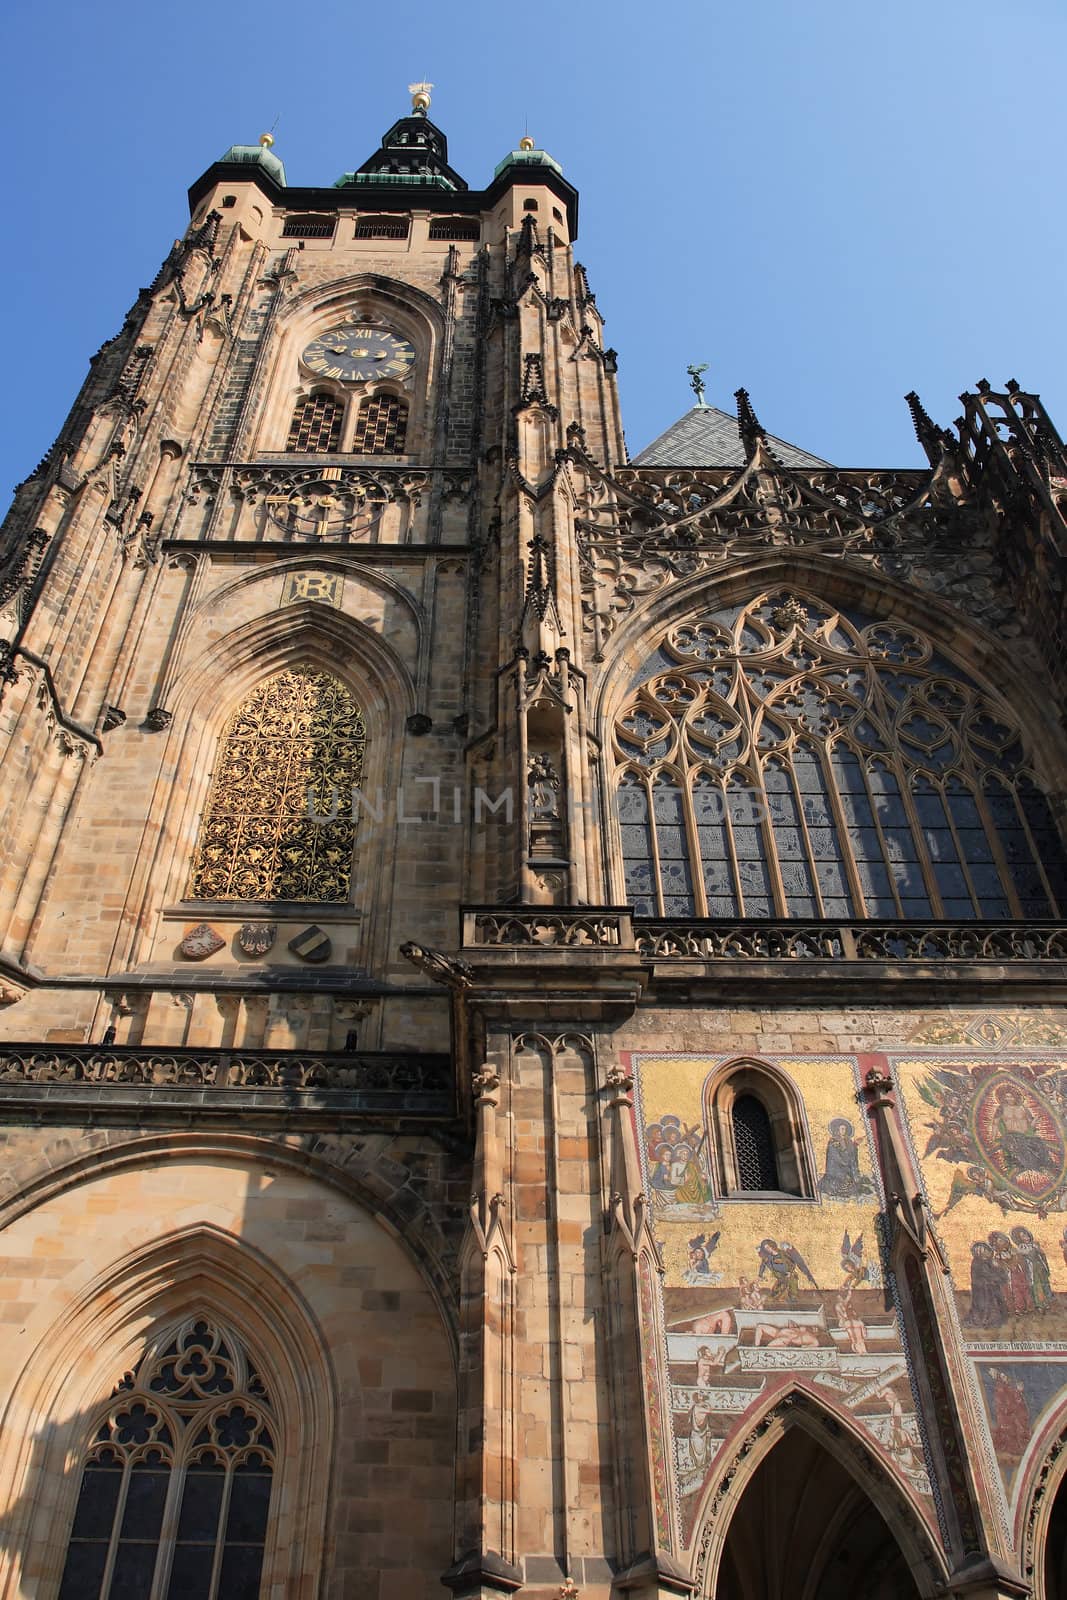 Exterior of famous St. Vitus Cathedral in Prague,Czech Rebublic